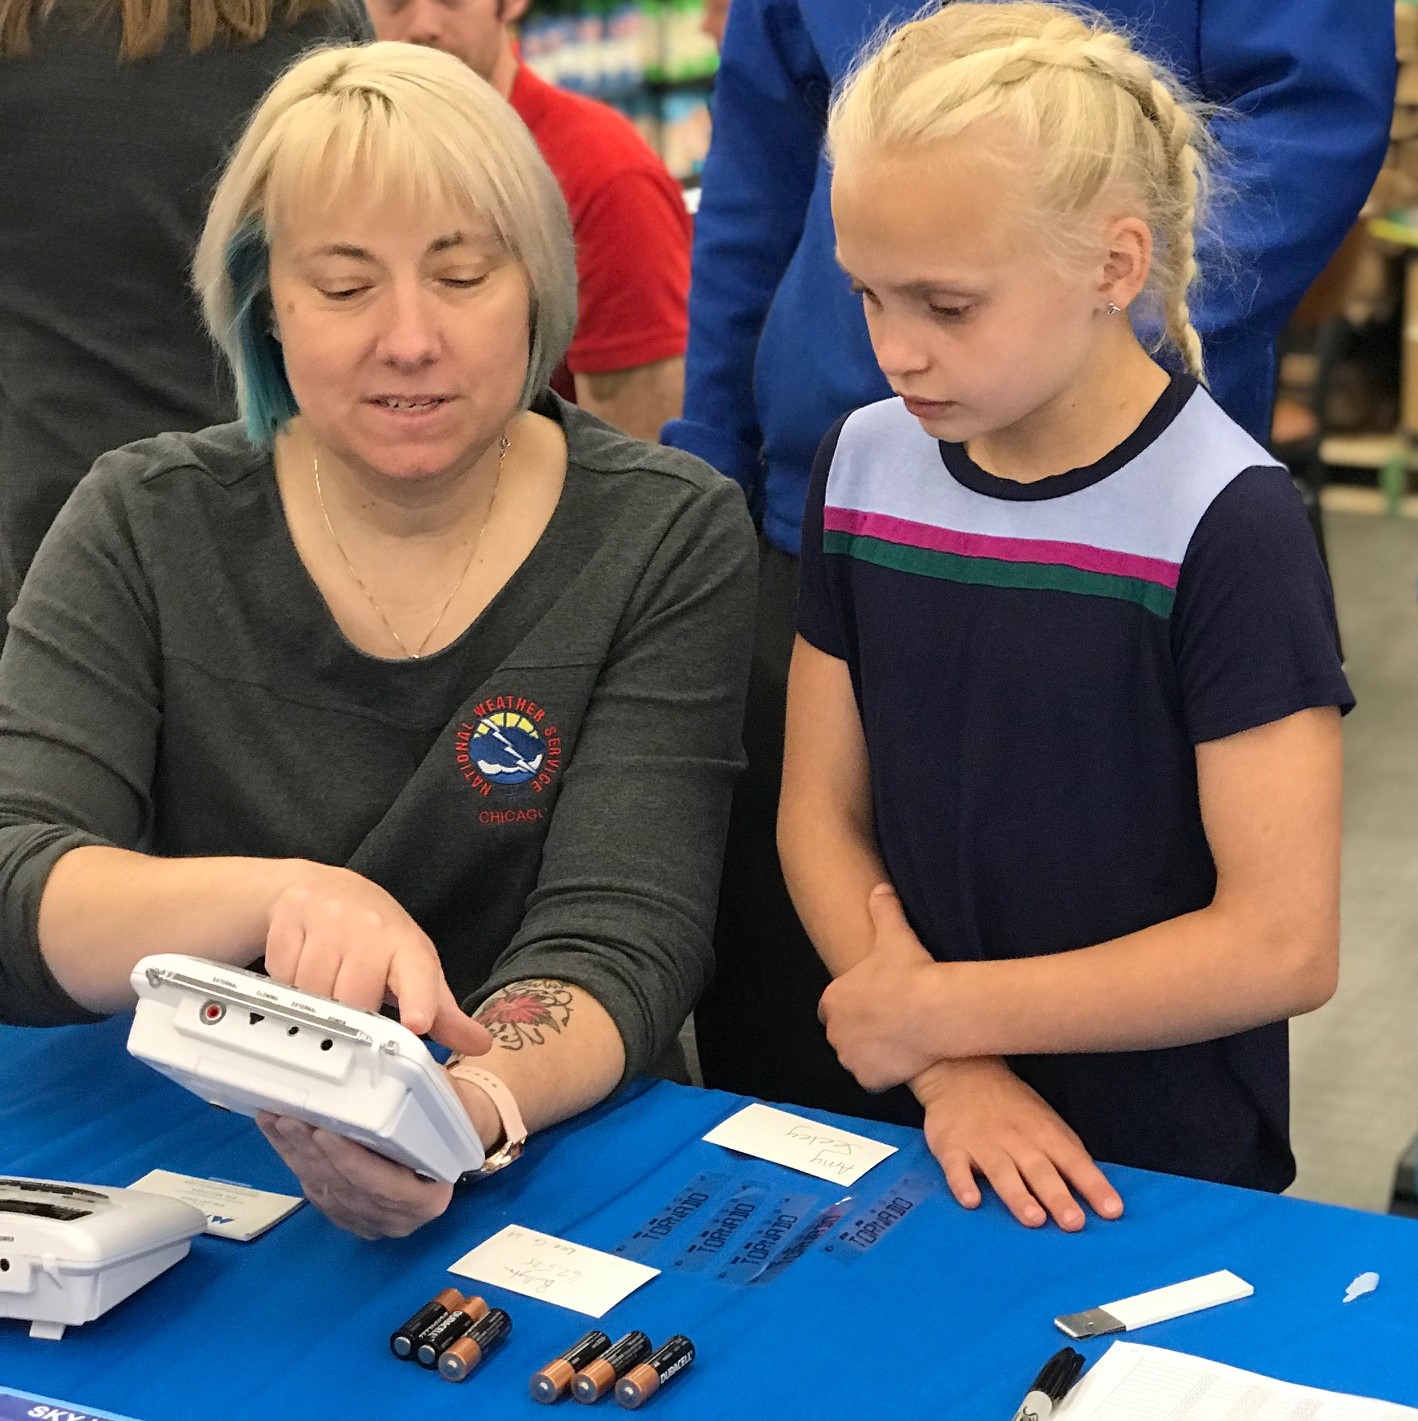 Amy teaching a child about a weather radio